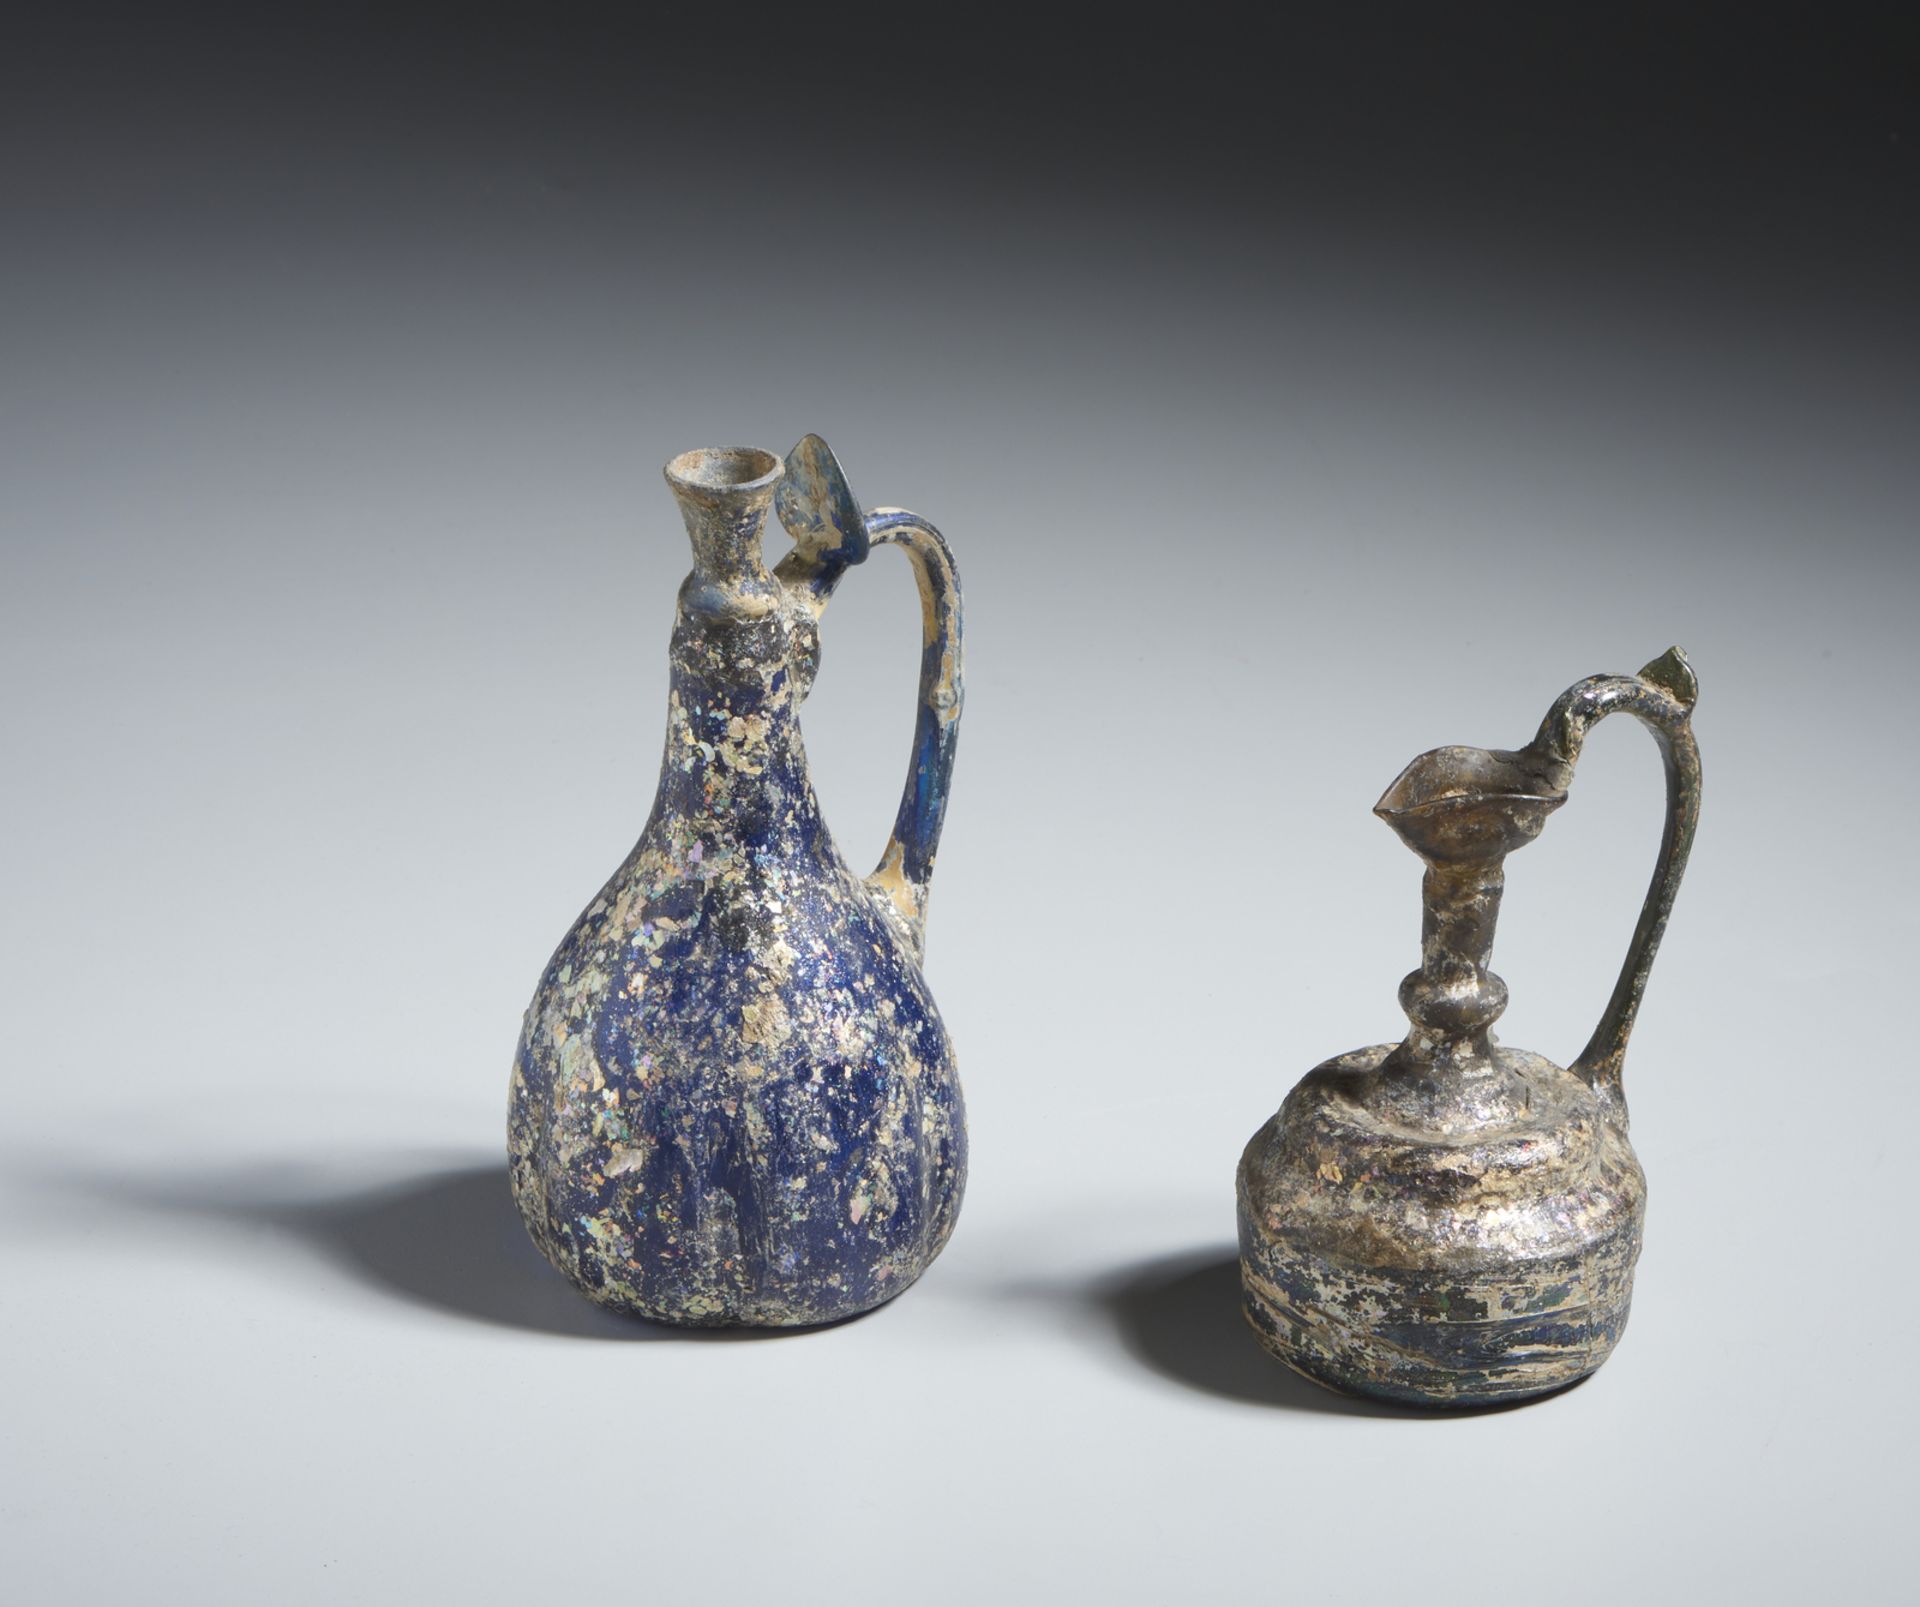 Two glass ewers Persia or Syria, 10th-12th century Cm 9,00 x 17,50